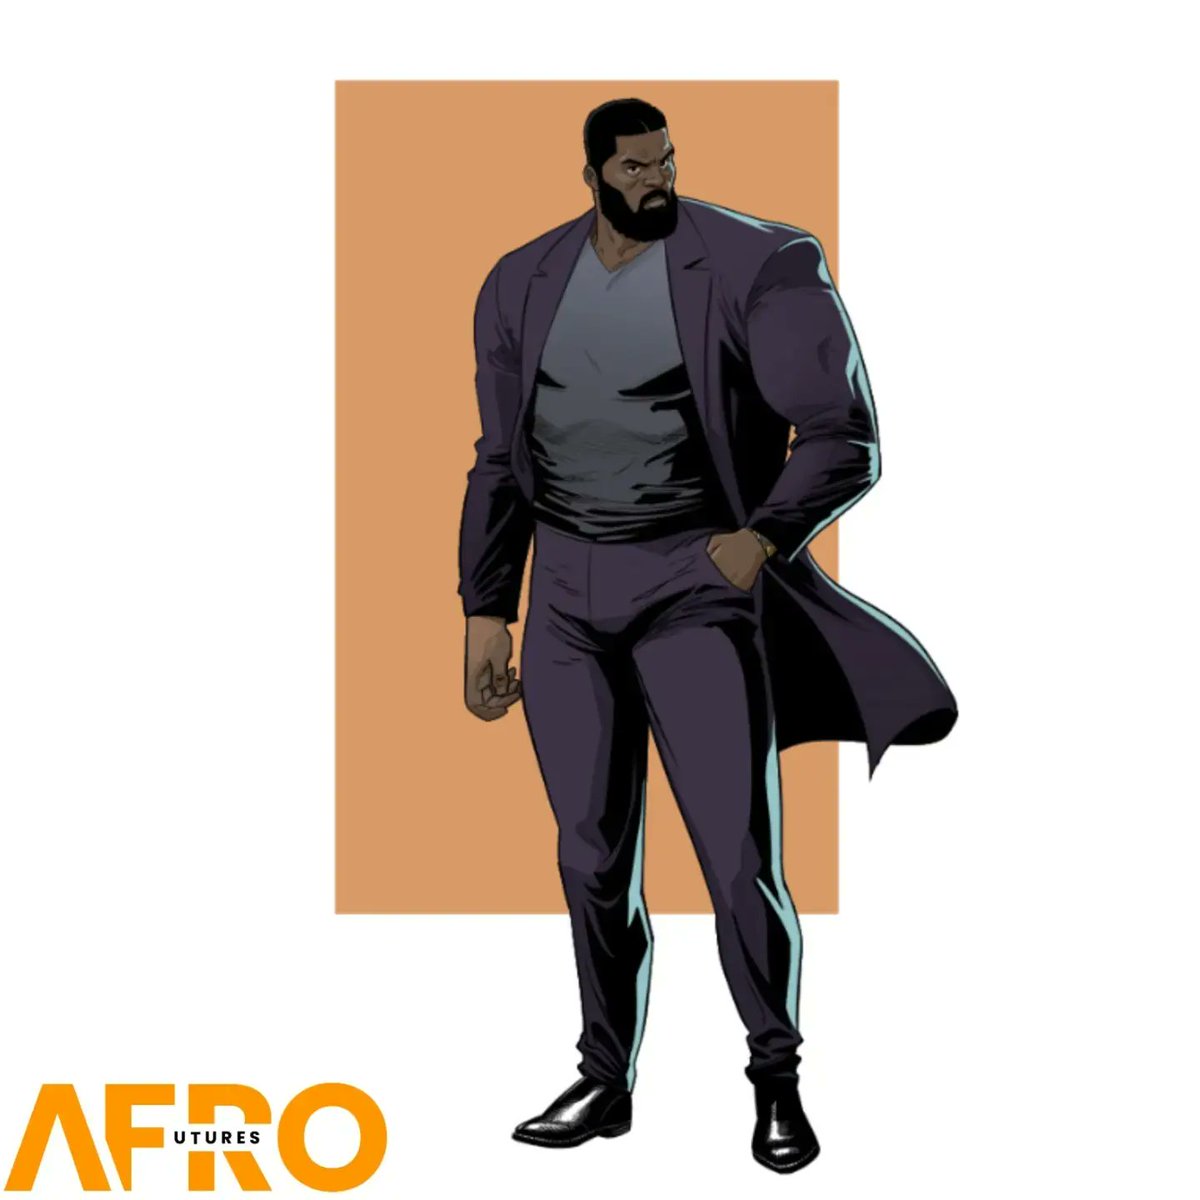 💣///💥 AFROFUTURES. Featuring OUR superteam that can beat up YOUR superteam! Coming soon to @GoRexCo. 🔥 Art by @nelsonblake2 🦾Coming soon to RexCo 🌿🚬💨Like, share, pass it along #Afrofuturism #afrofutures #afrofuturismo #blackcreators #blackcreativesmatter